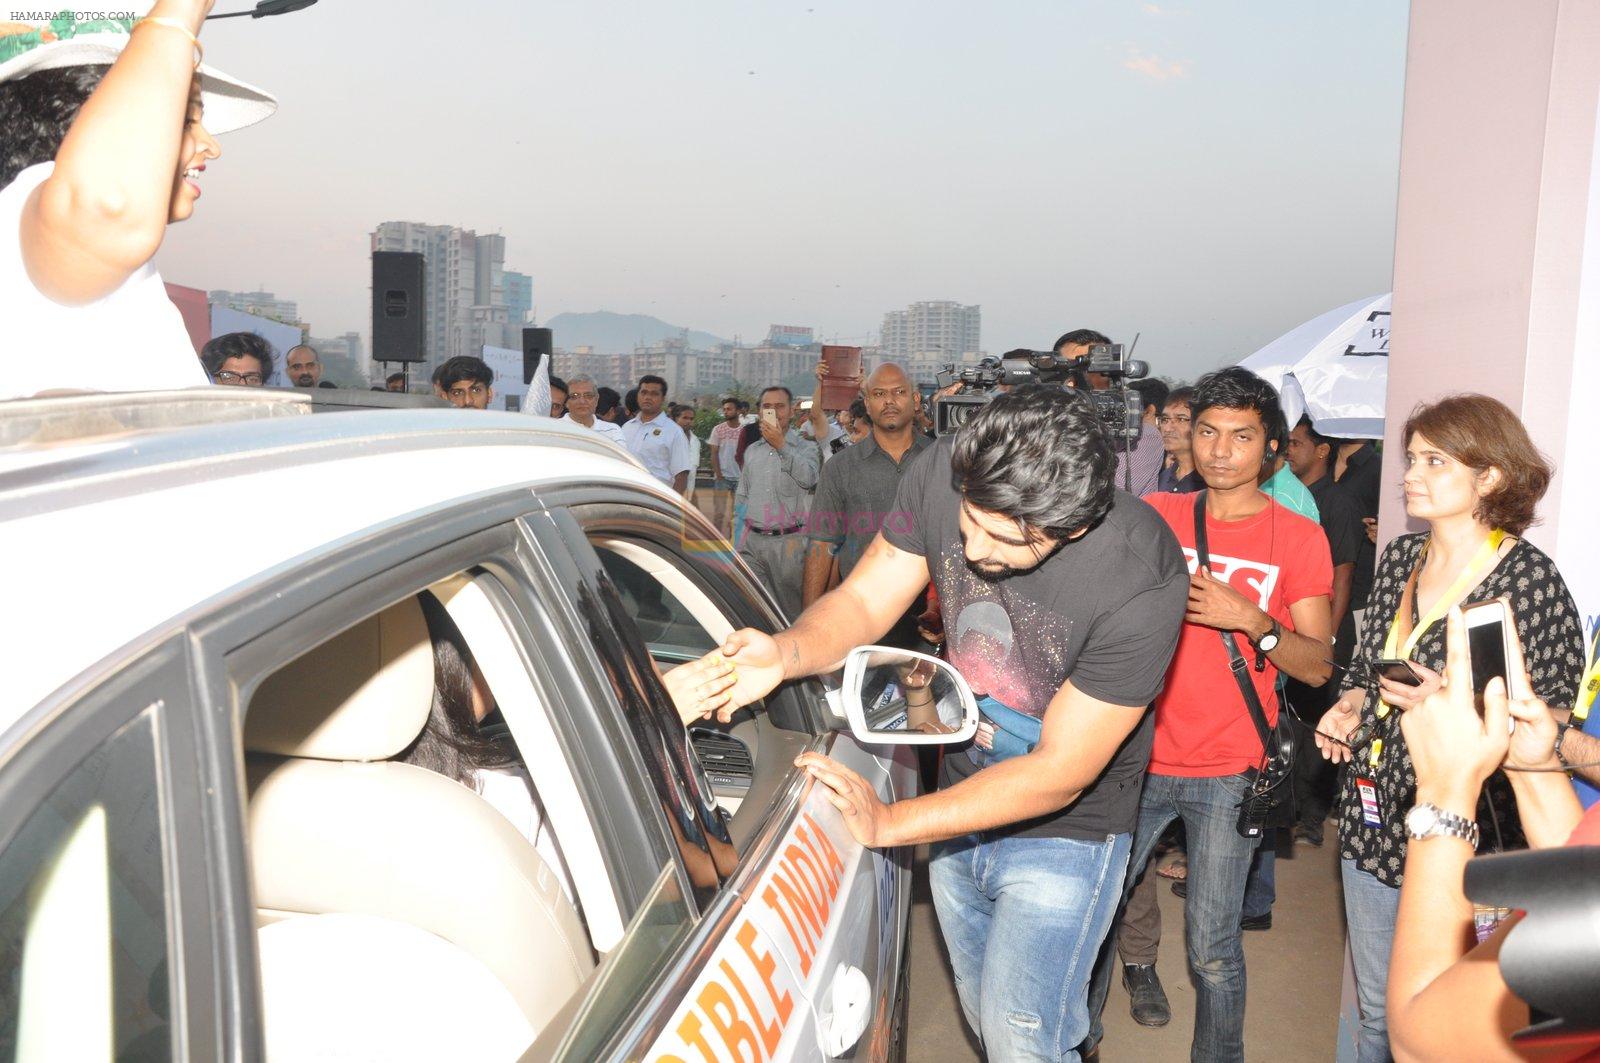 Arjun Kapoor flags off Times Women's drive on 5th March 2016